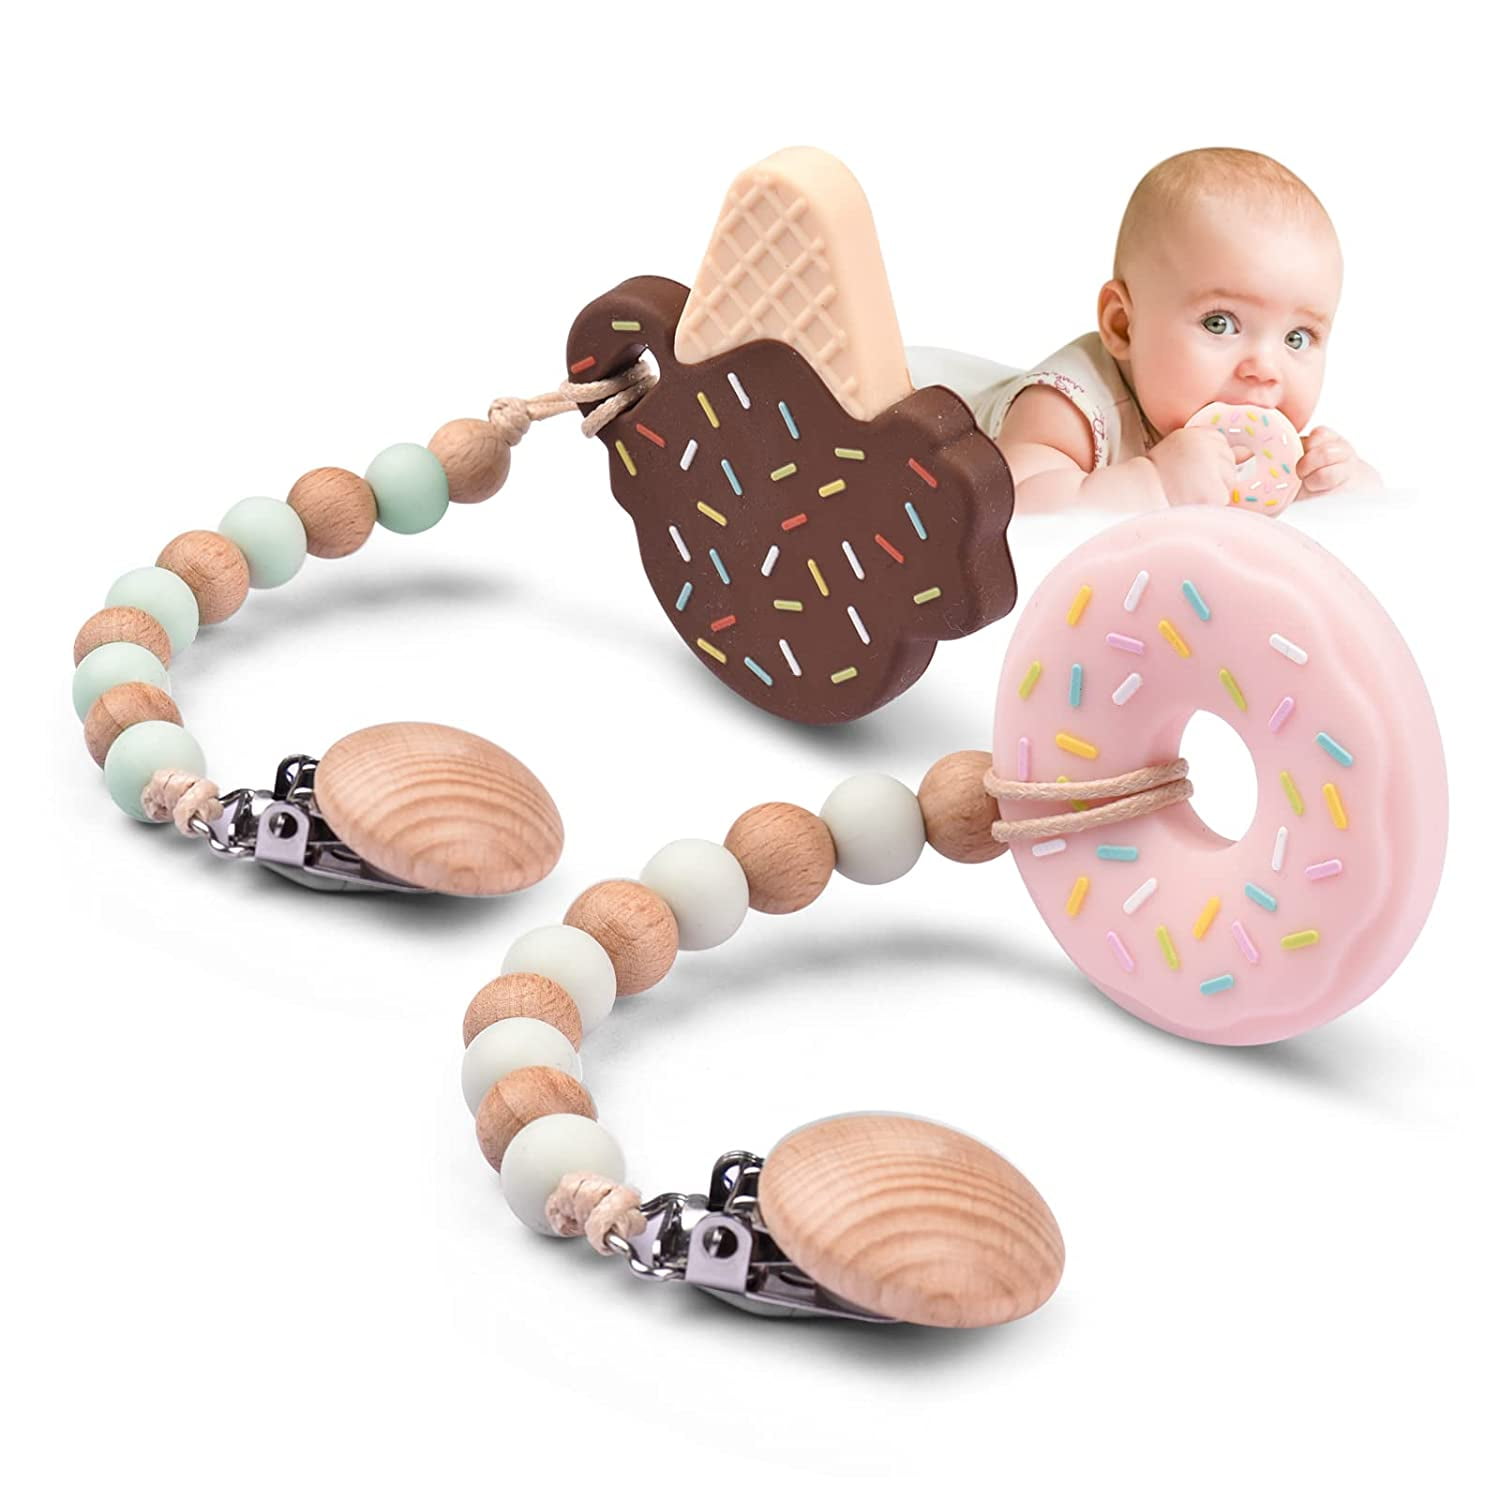 Baby Kids Animal Wooden Silicone Beads Teether Ring Infant Teething Bracelet SK 